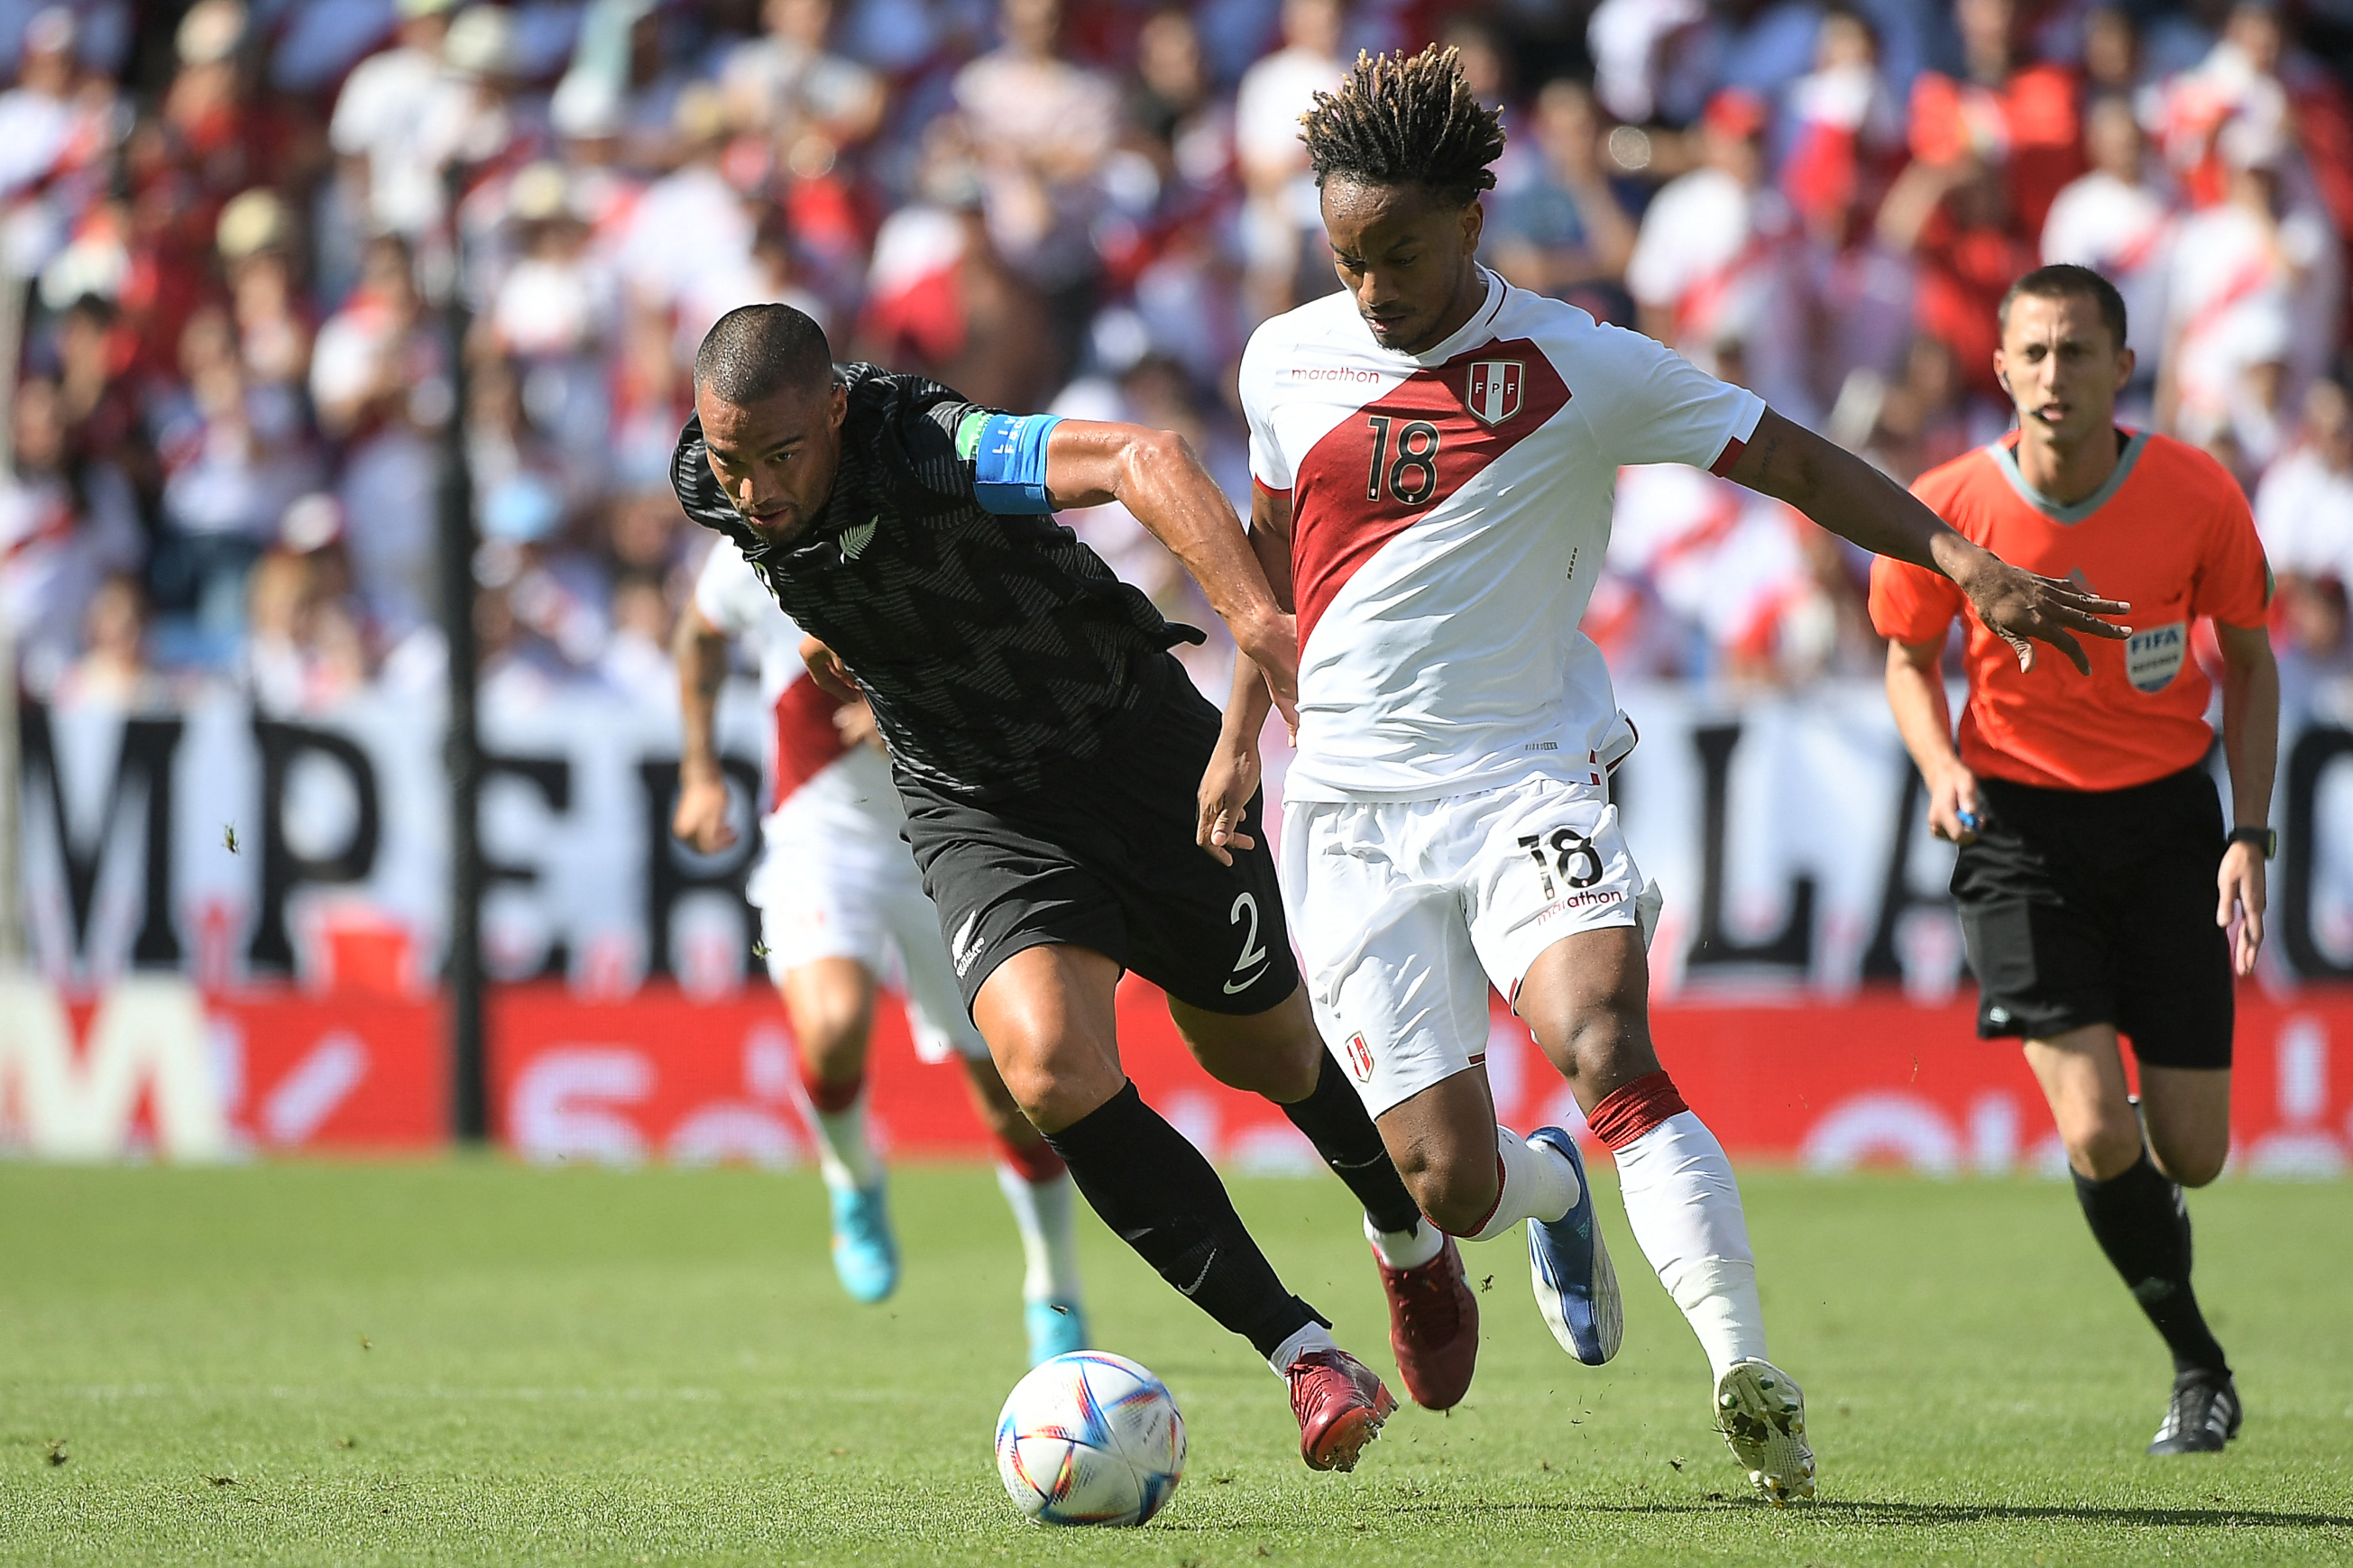 New Zealand defender Winston Reid (L) fights for the ball with Peru's Andre Carrillo during an international friendly football match between Peru and New Zealand on June 5, 2022 at the RCDE Stadium in Cornella de Lப்bracott.  (Photo by Jose Jordan / AFP)